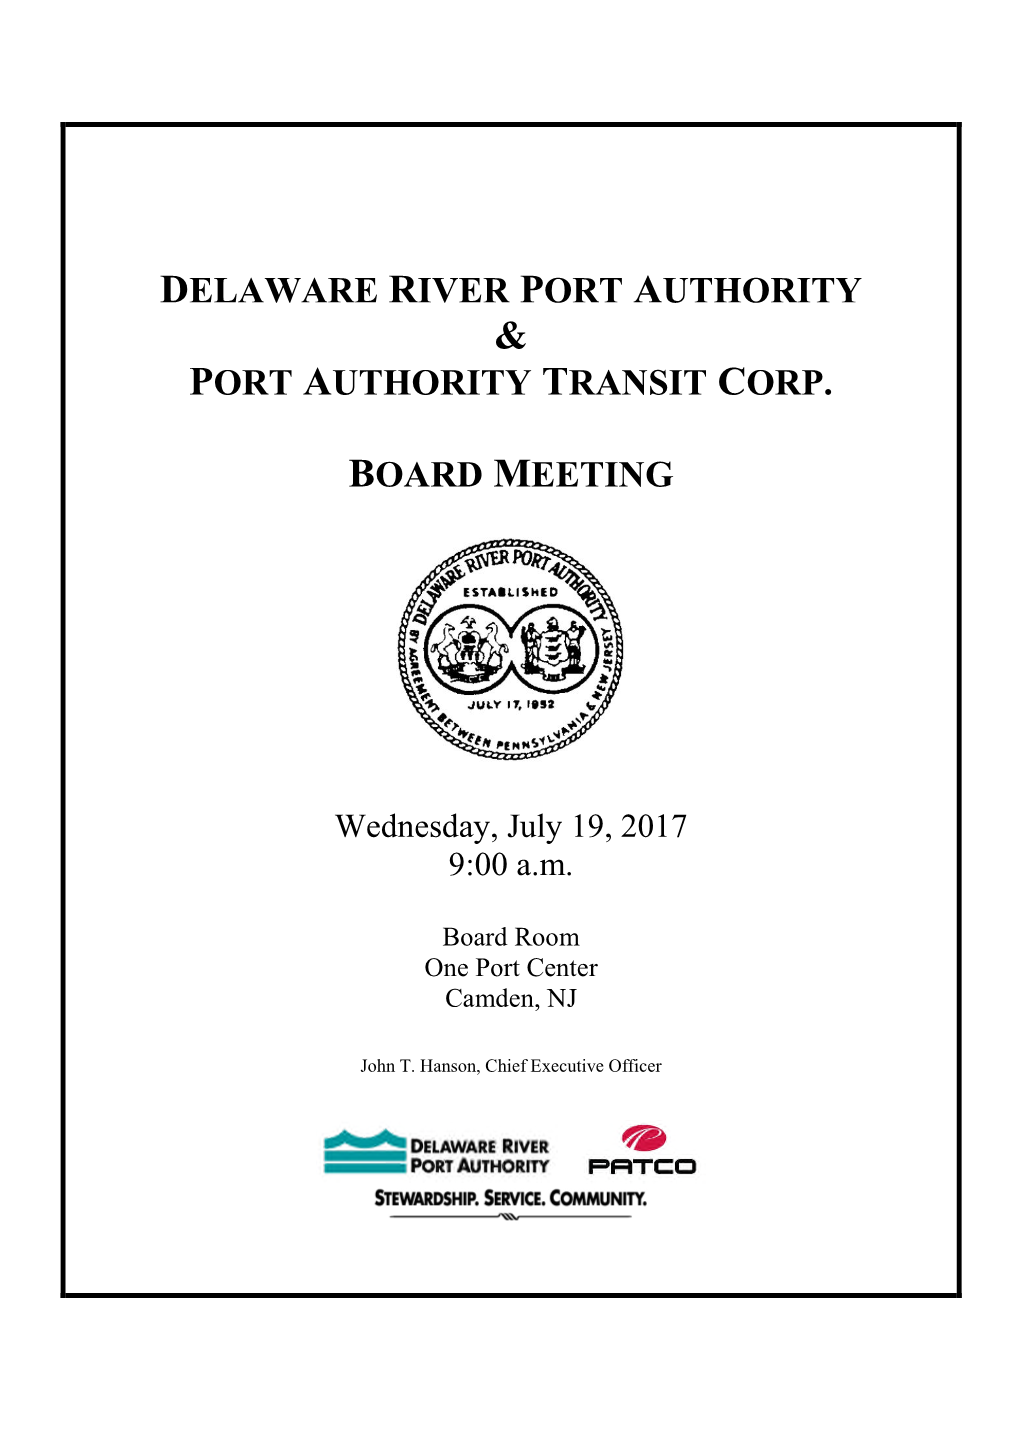 Delaware River Port Authority Port Authority Transit Corp. Board Meeting